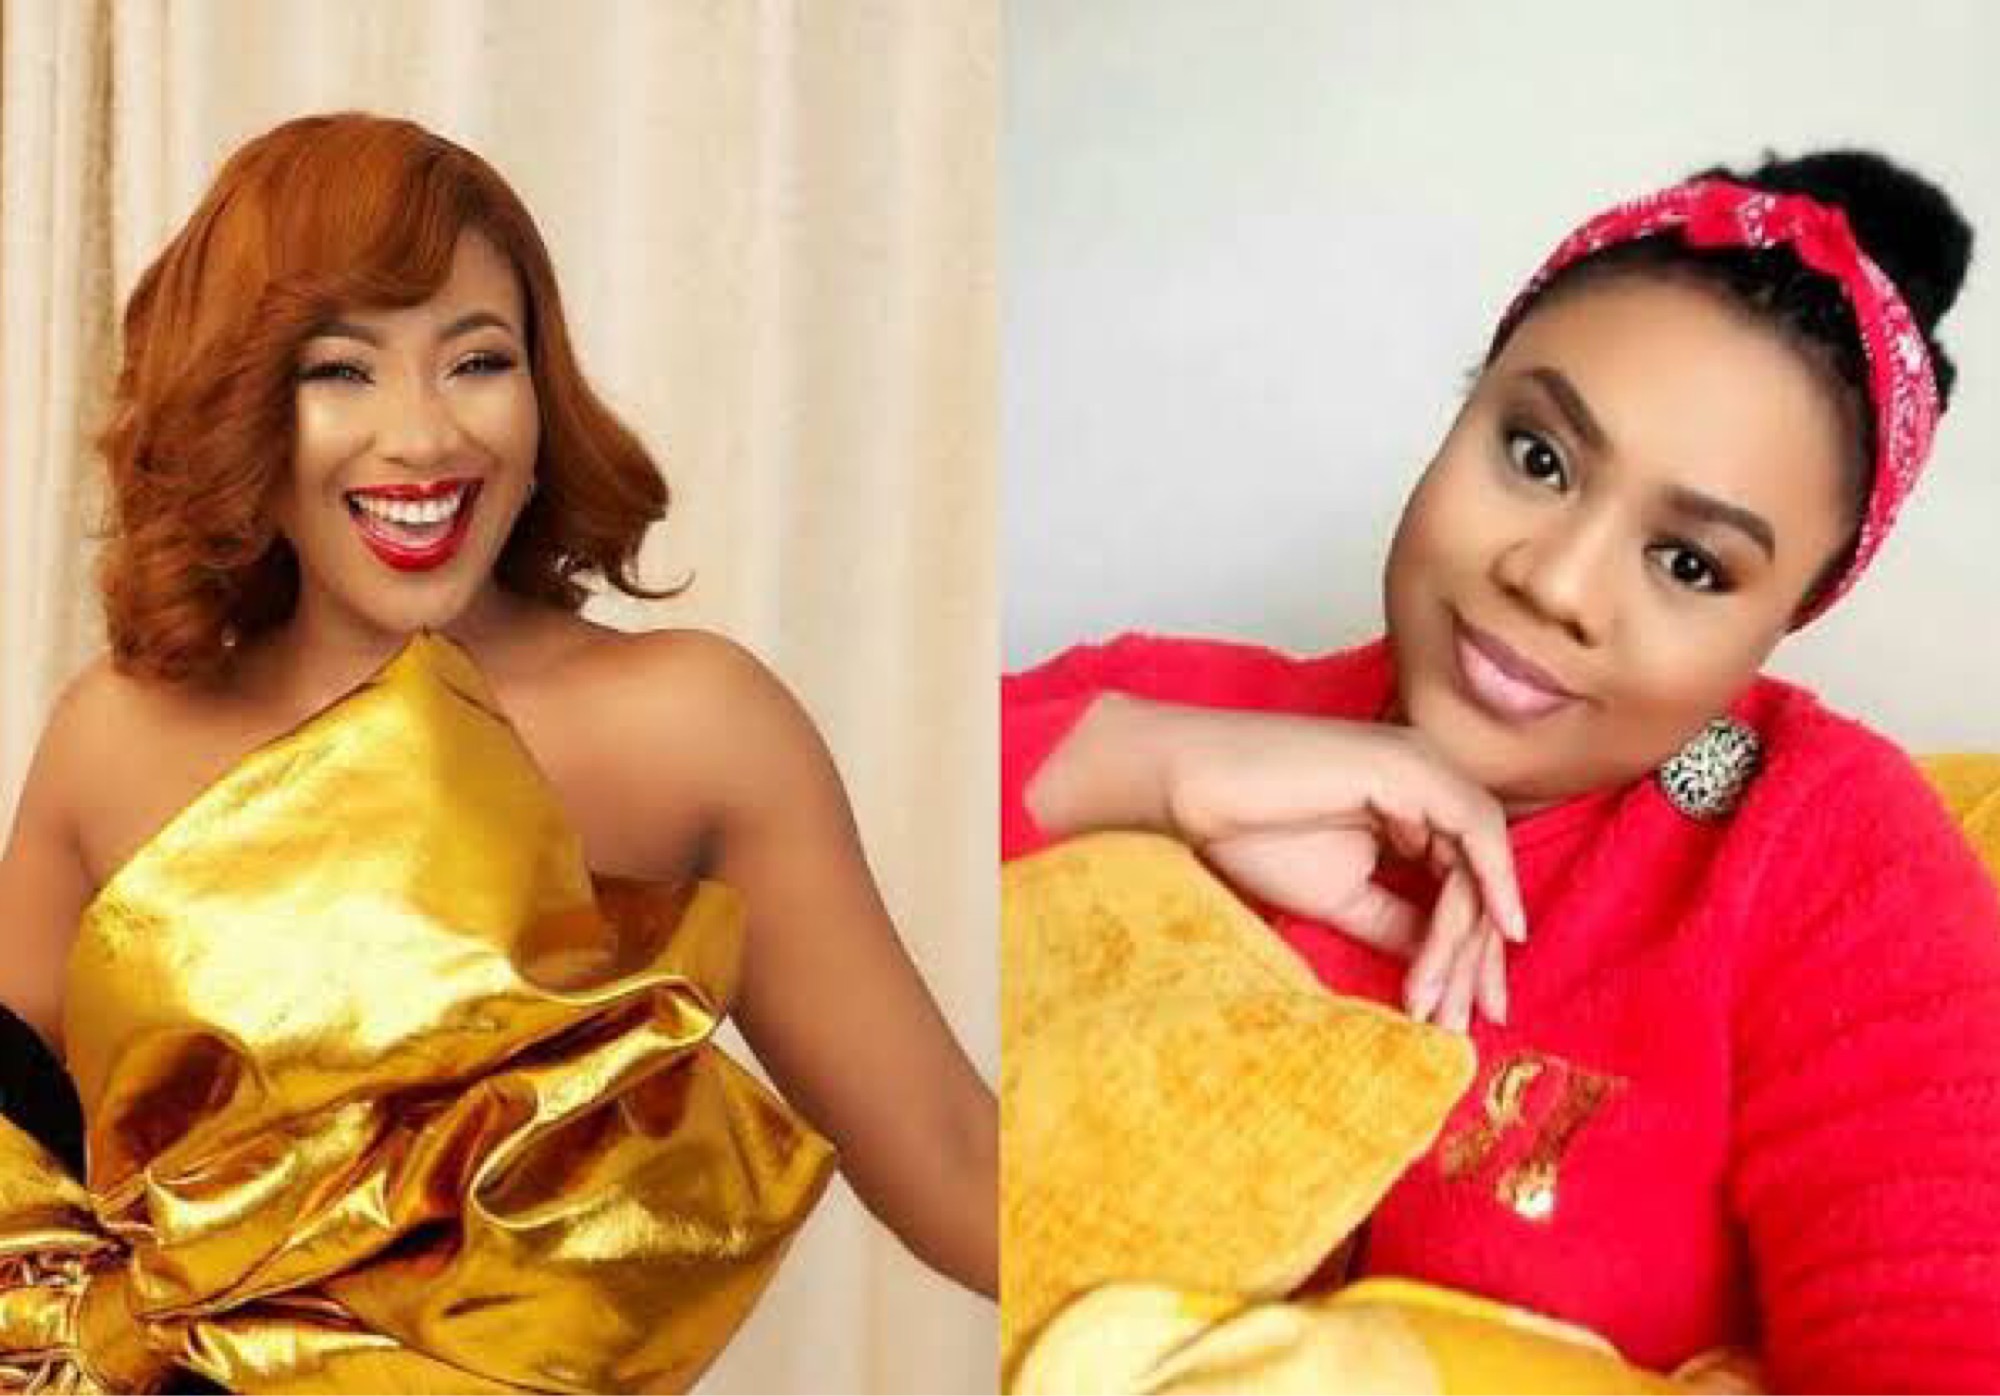 Stella Damascus Reacts As Erica Says She Wants To Be Pampered And Babied By Someone